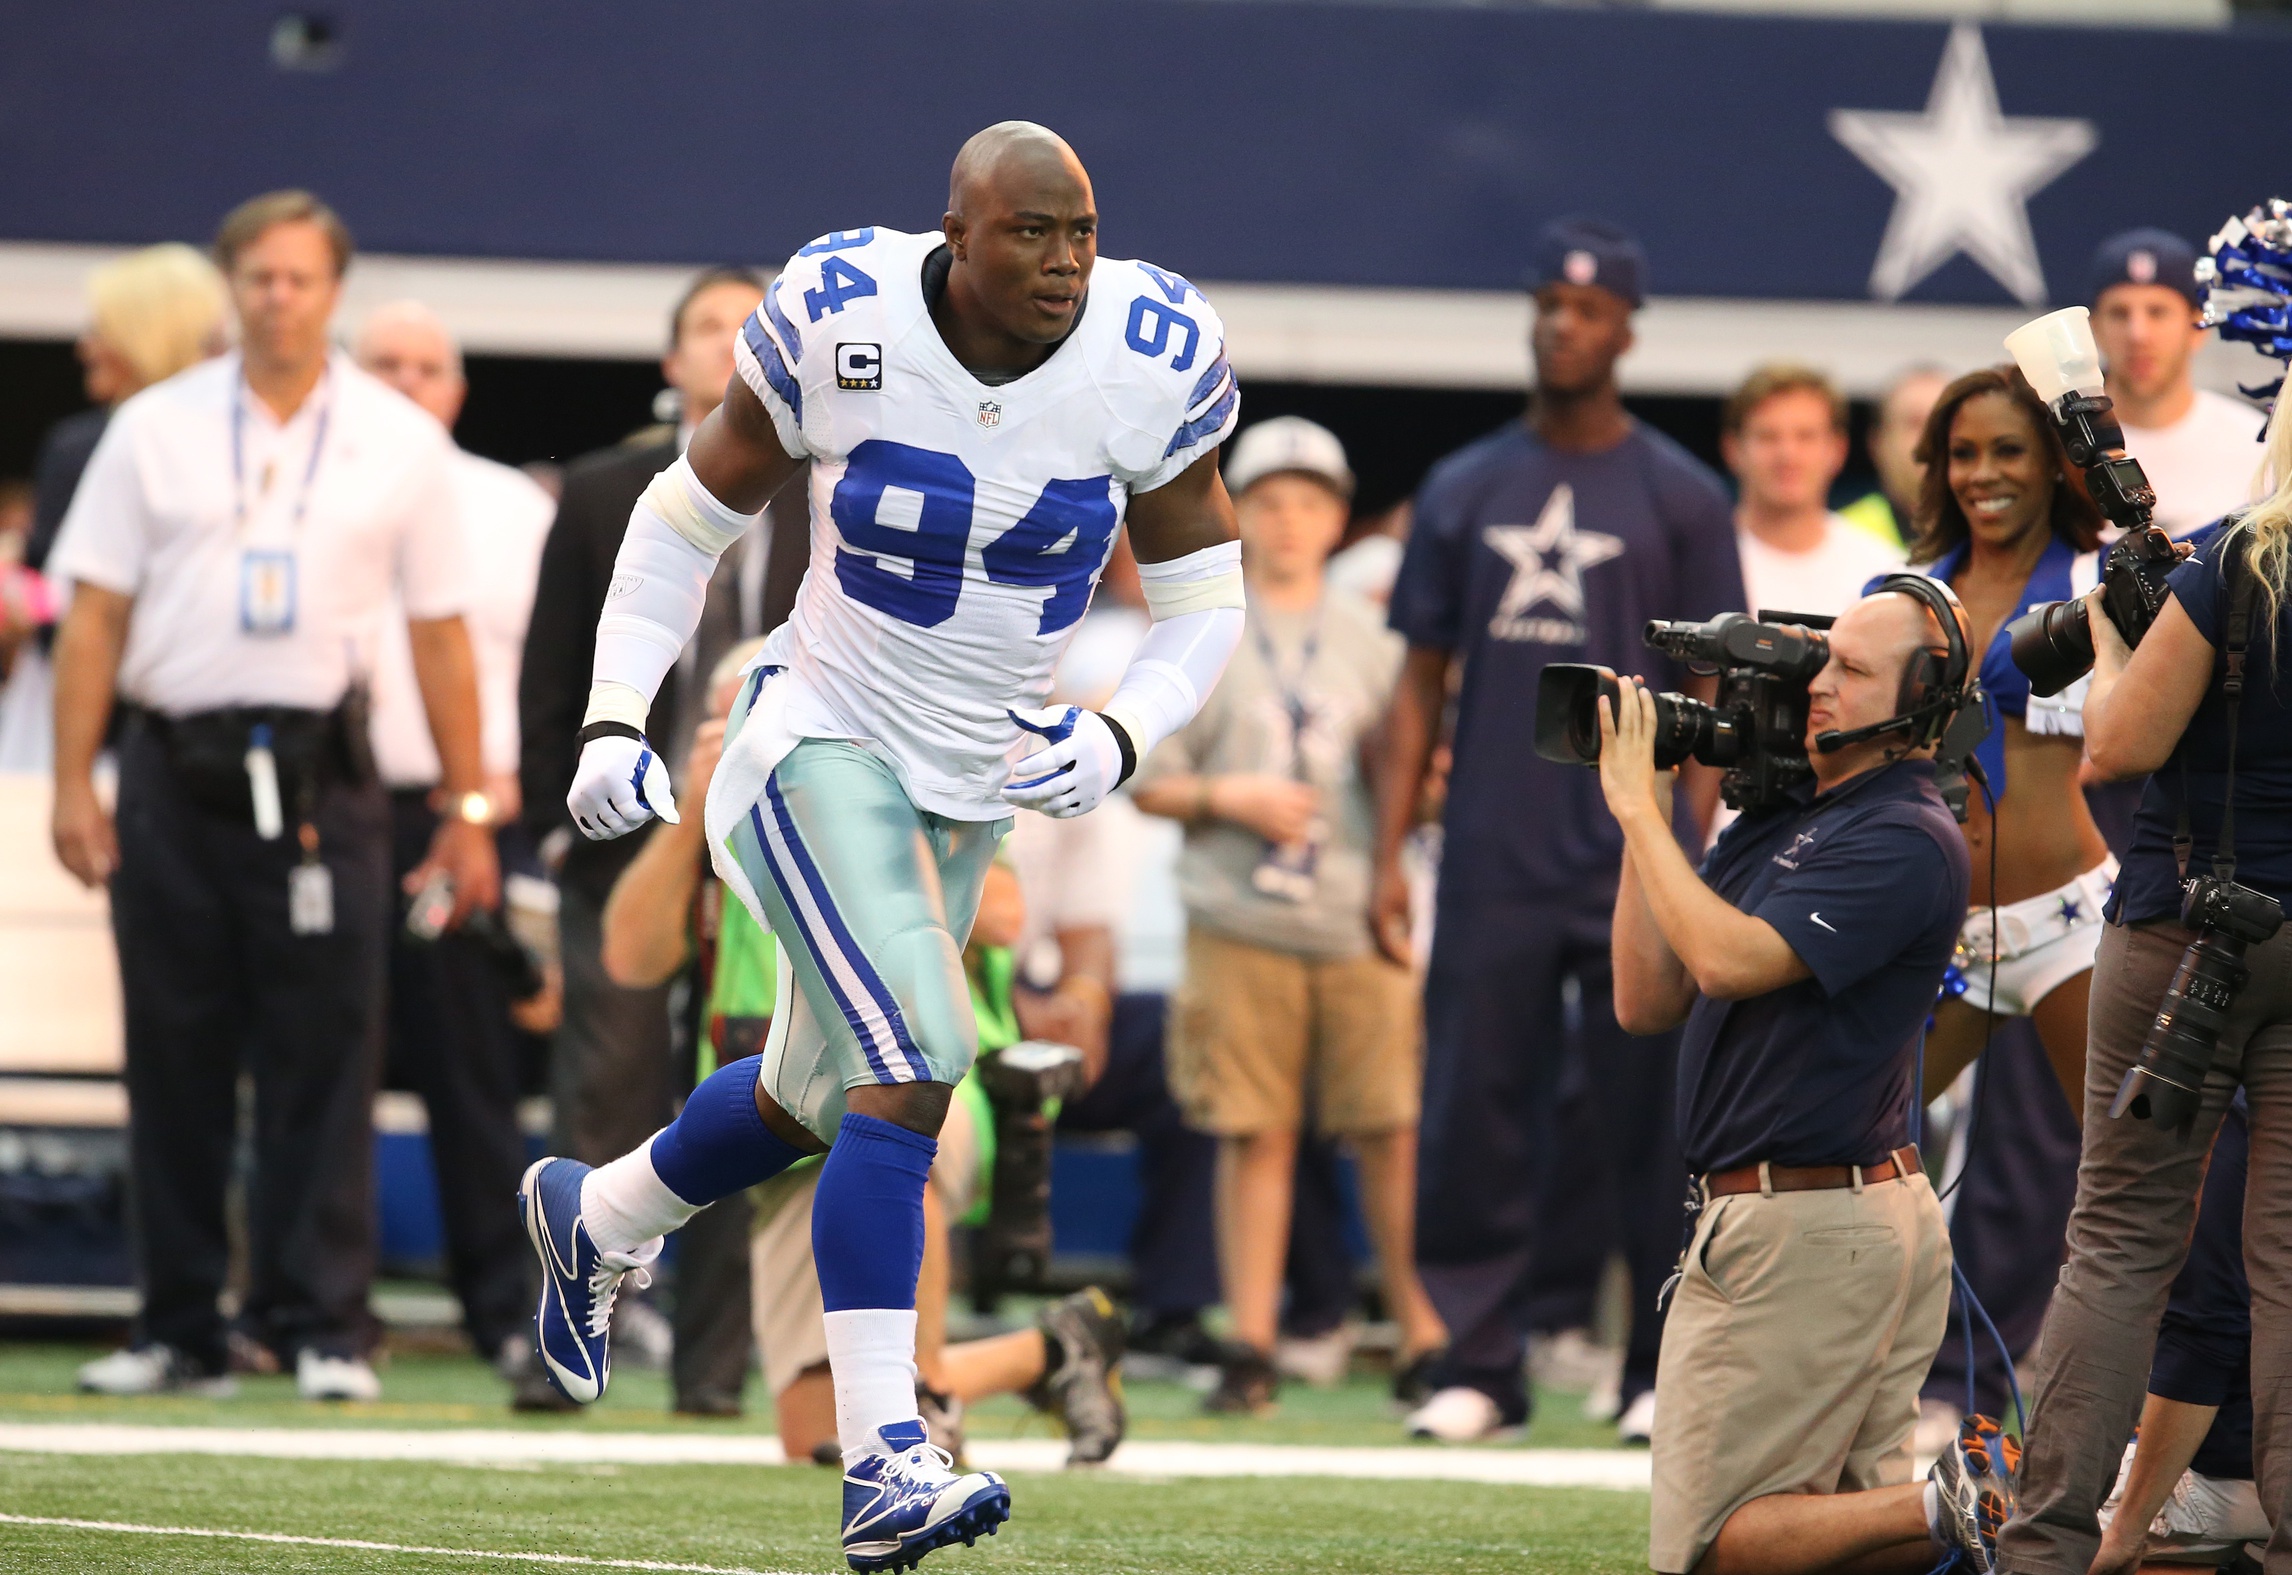 DeMarcus Ware (94)takes the field prior to the game against the St. Louis Rams at AT&T Stadium.